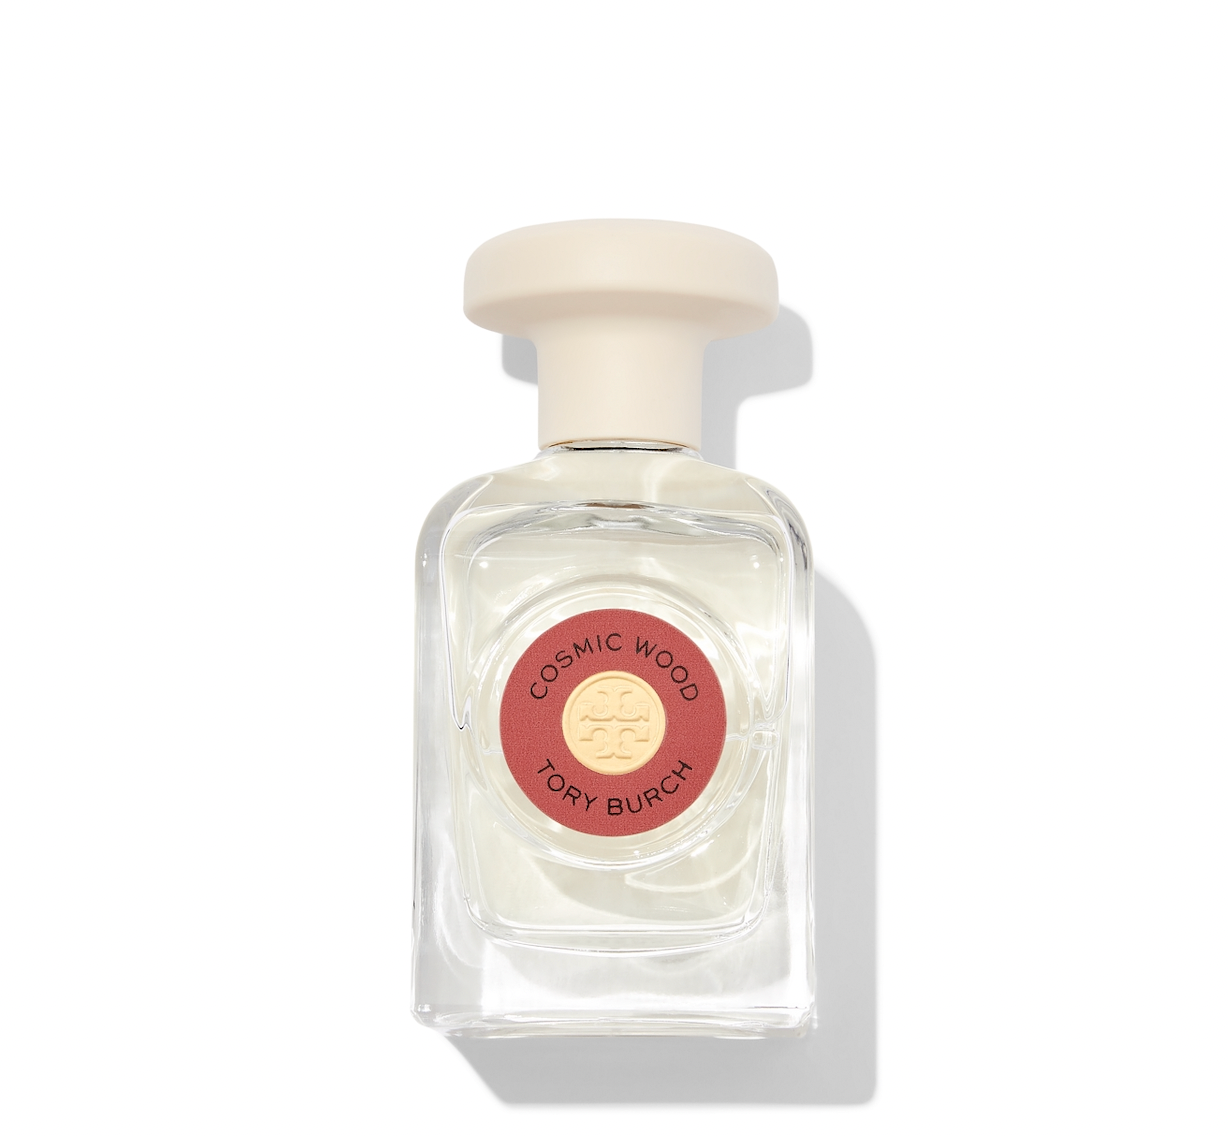 EBF1414 Compare to Le Jour se Leve, Perfume Oil Fragrance for Women